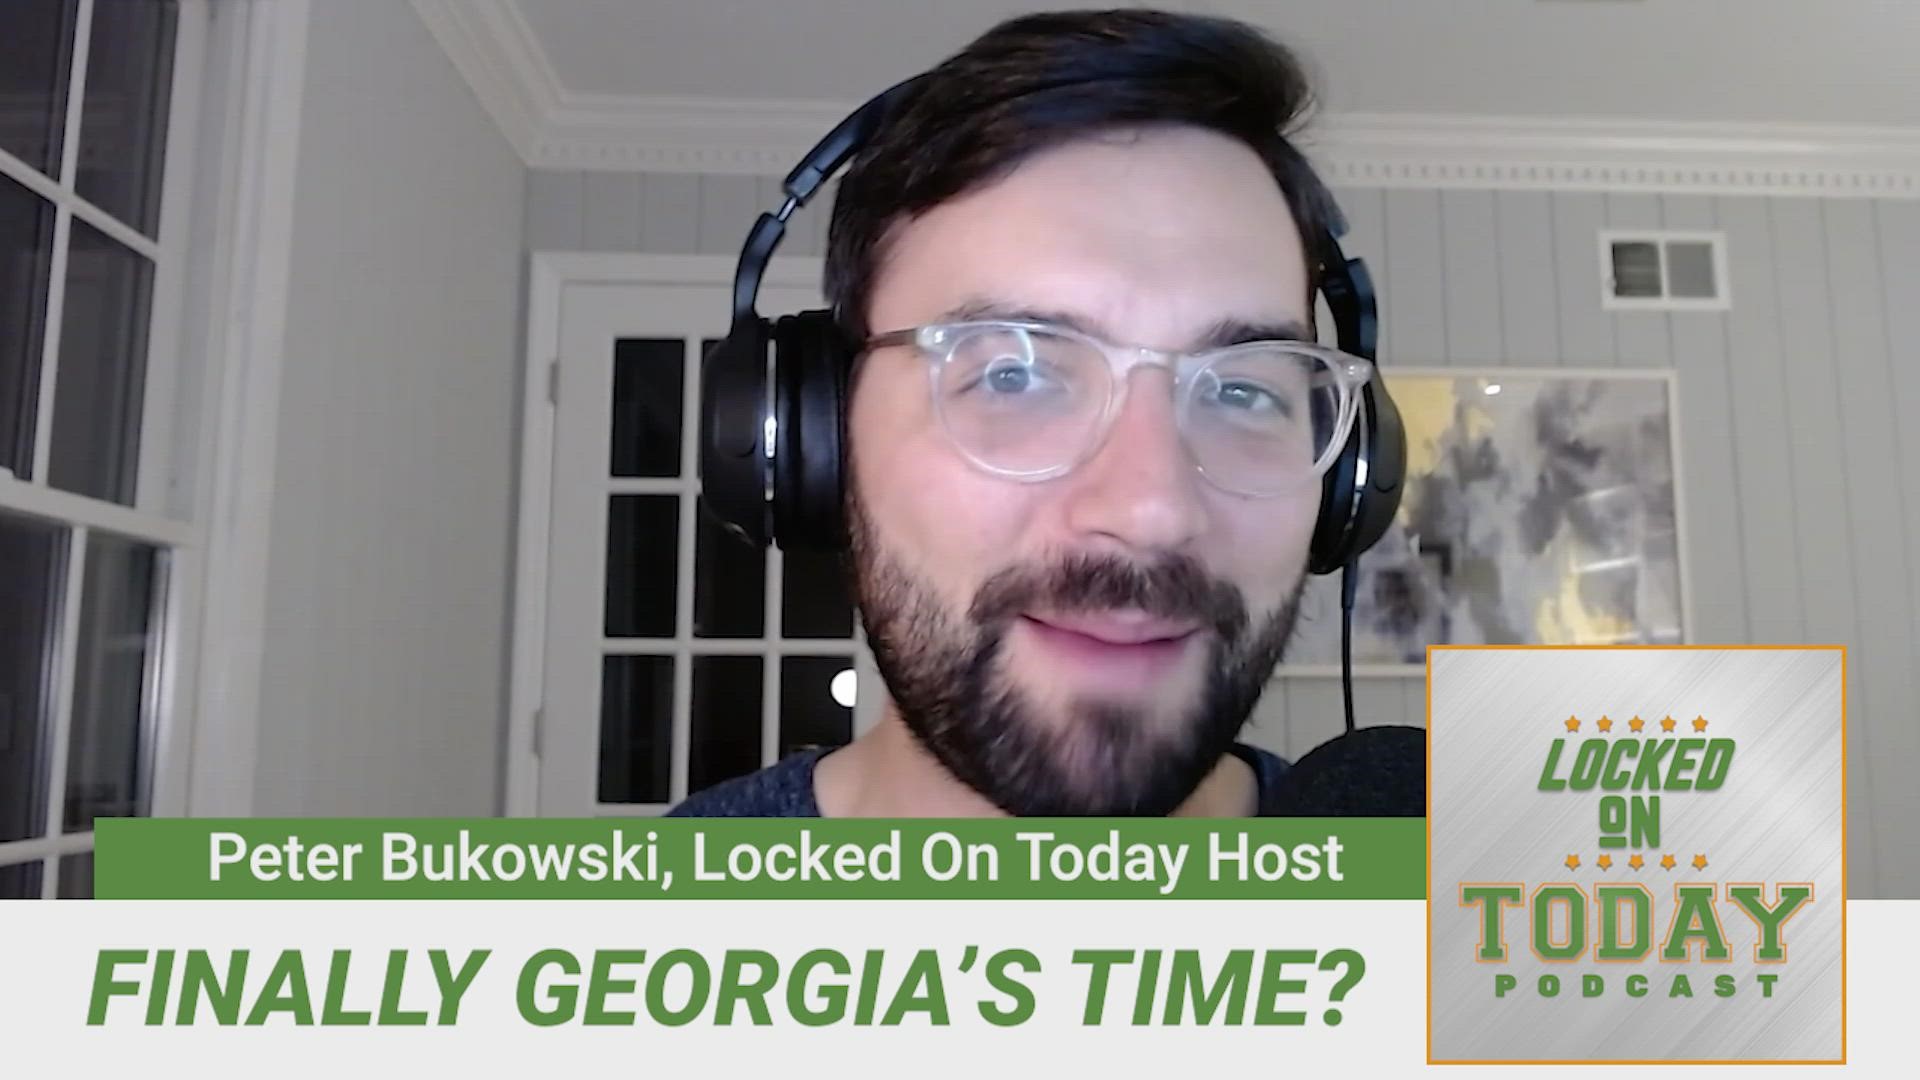 Daniel Monroe of the Locked On Bulldogs podcast joins Peter Bukowski on Locked On Today to preview Saturday's momentous matchup between Georgia and Alabama.